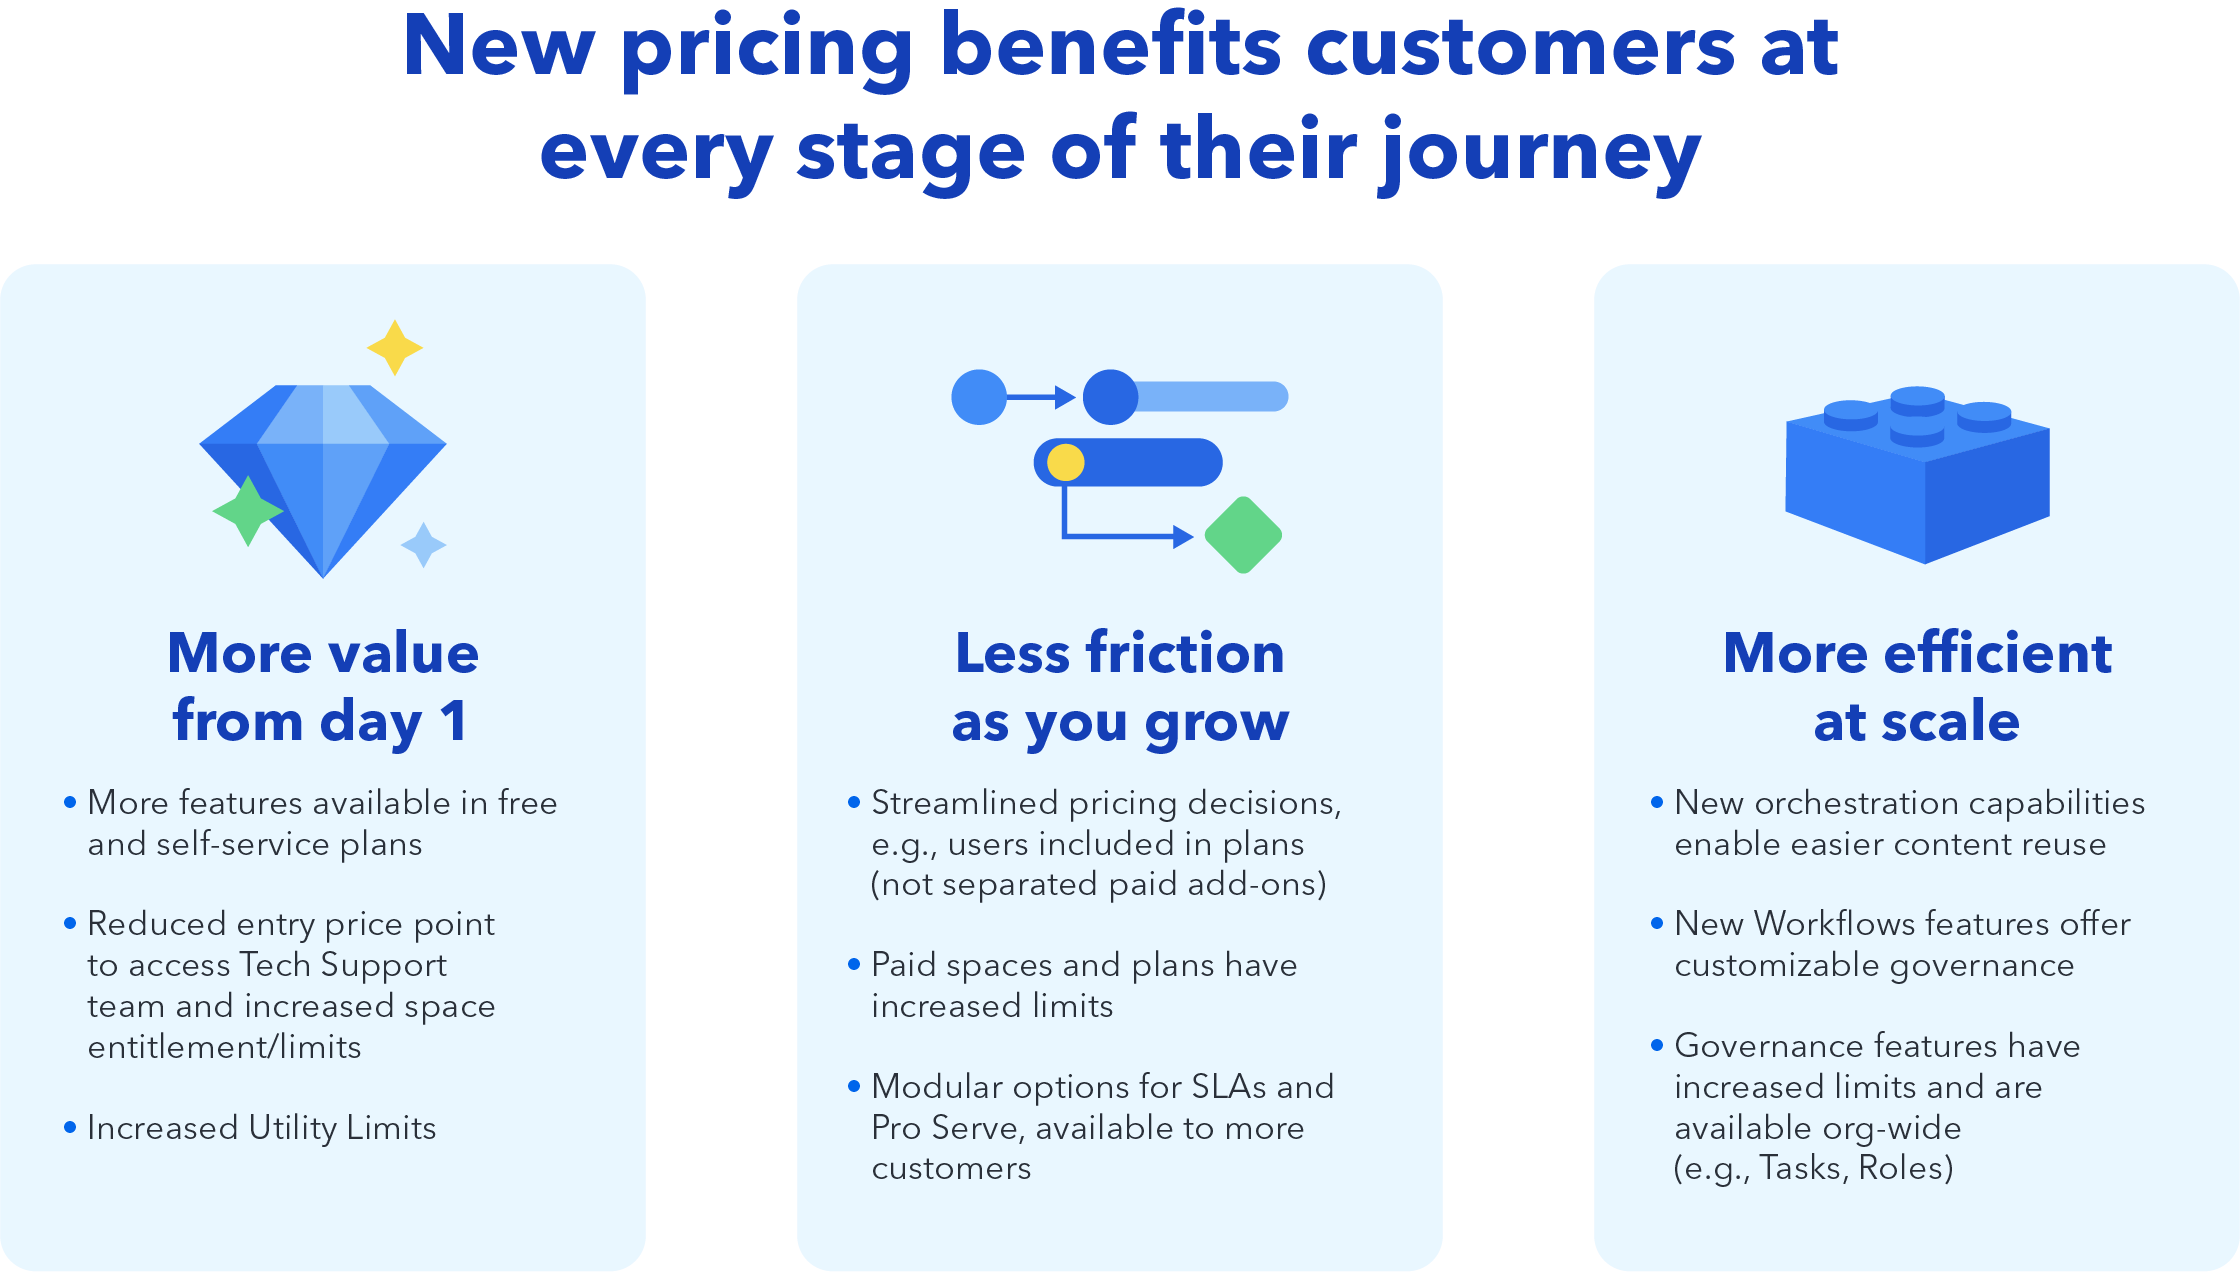 New pricing benefits customers at every stage of their journey.